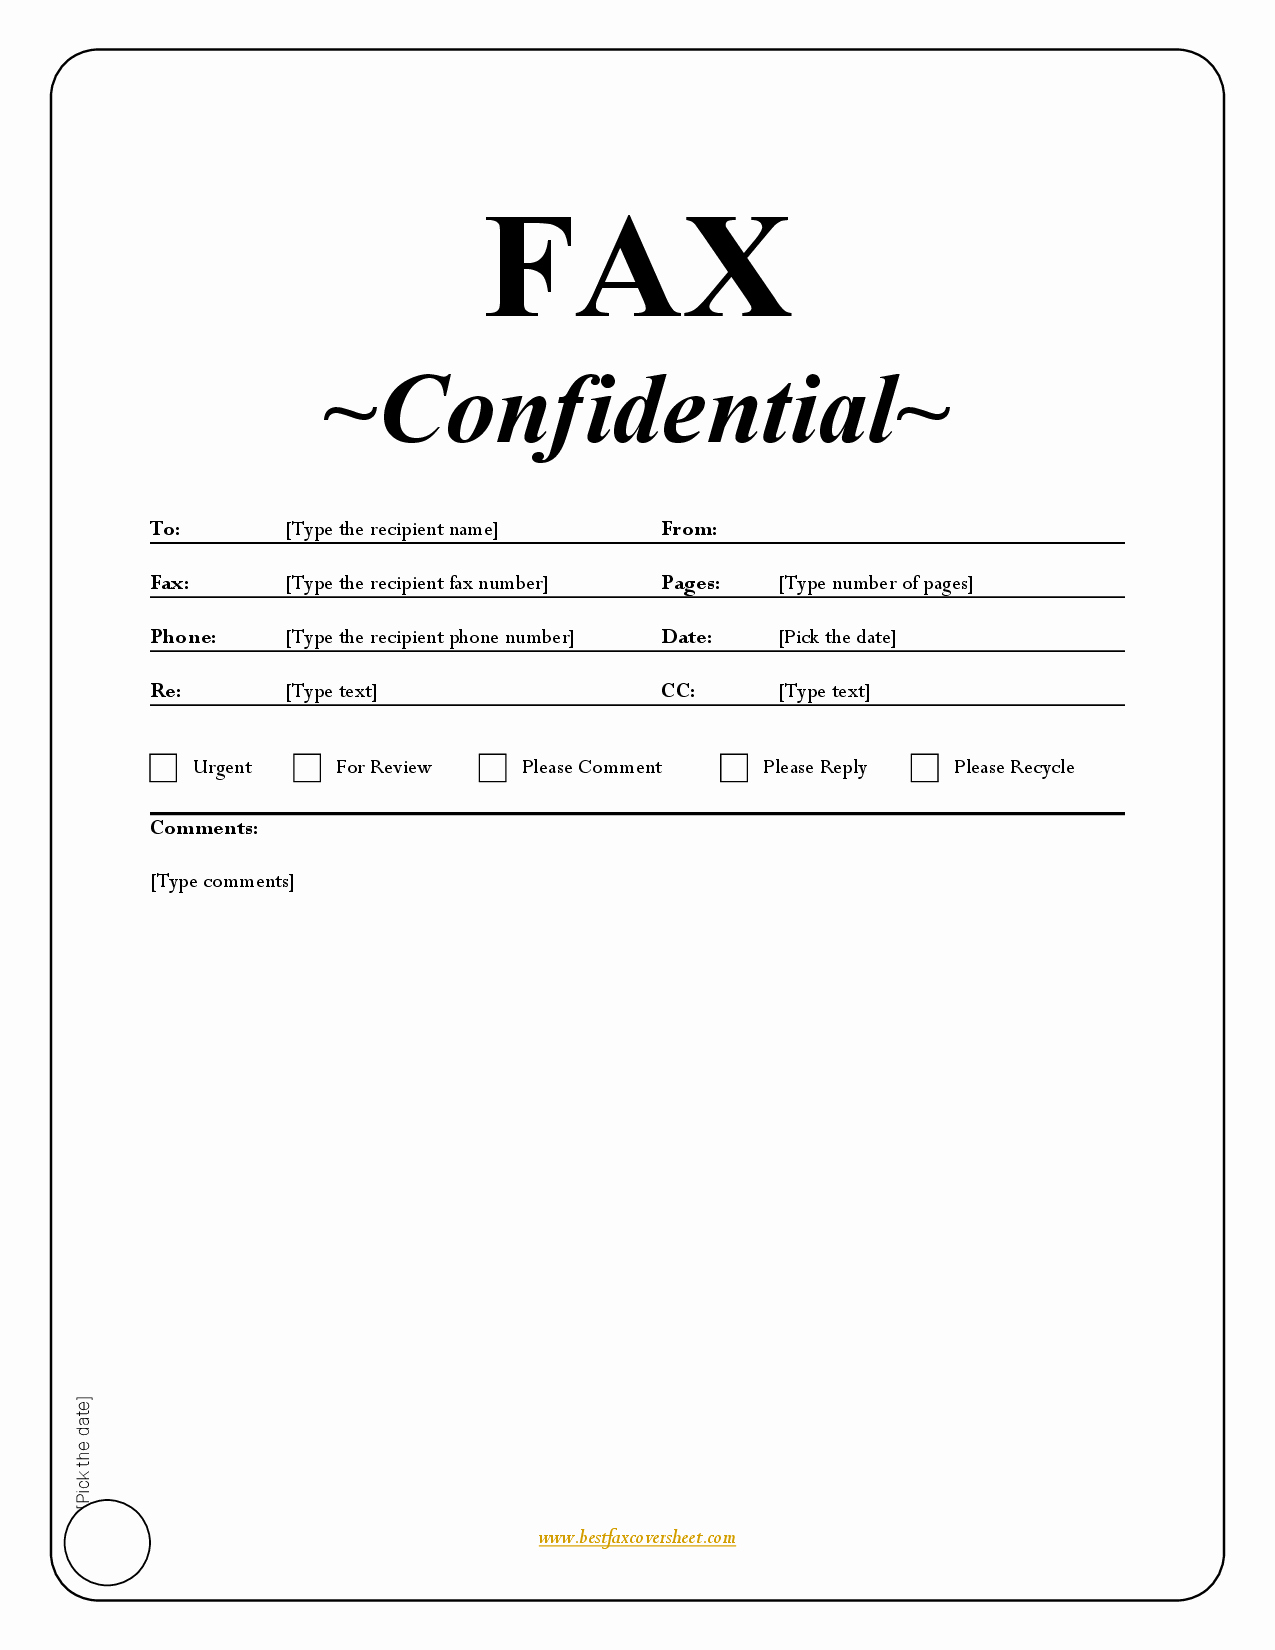 Fax Cover Sheet Pdf Free Awesome Printable Fax Cover Sheet with Confidentiality Statement